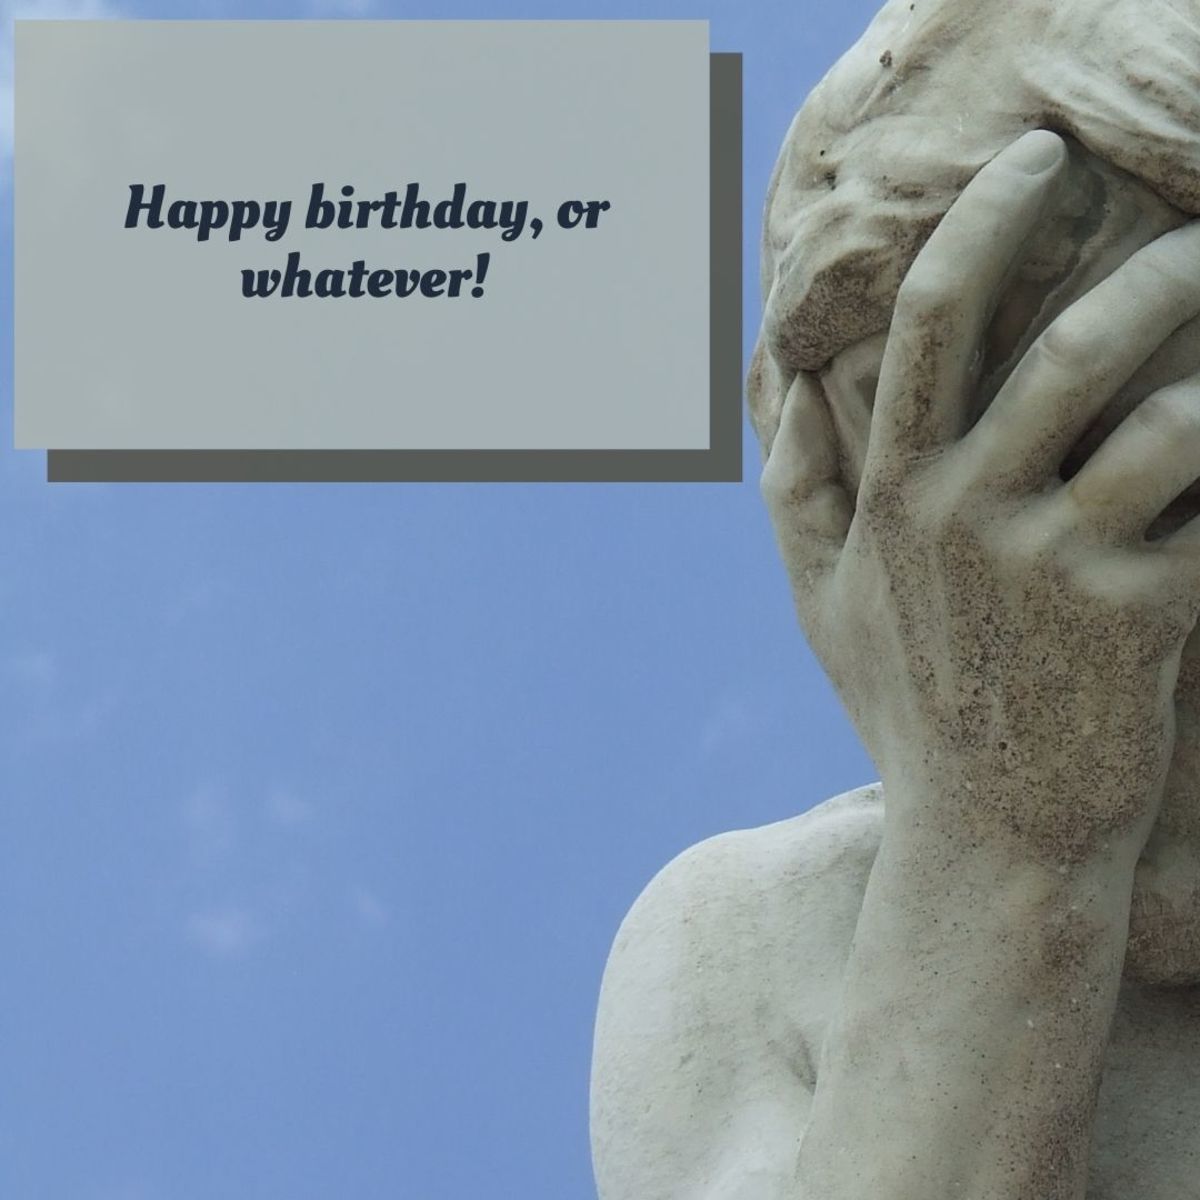 Send your brother a joking happy birthday message. He'll get the point.